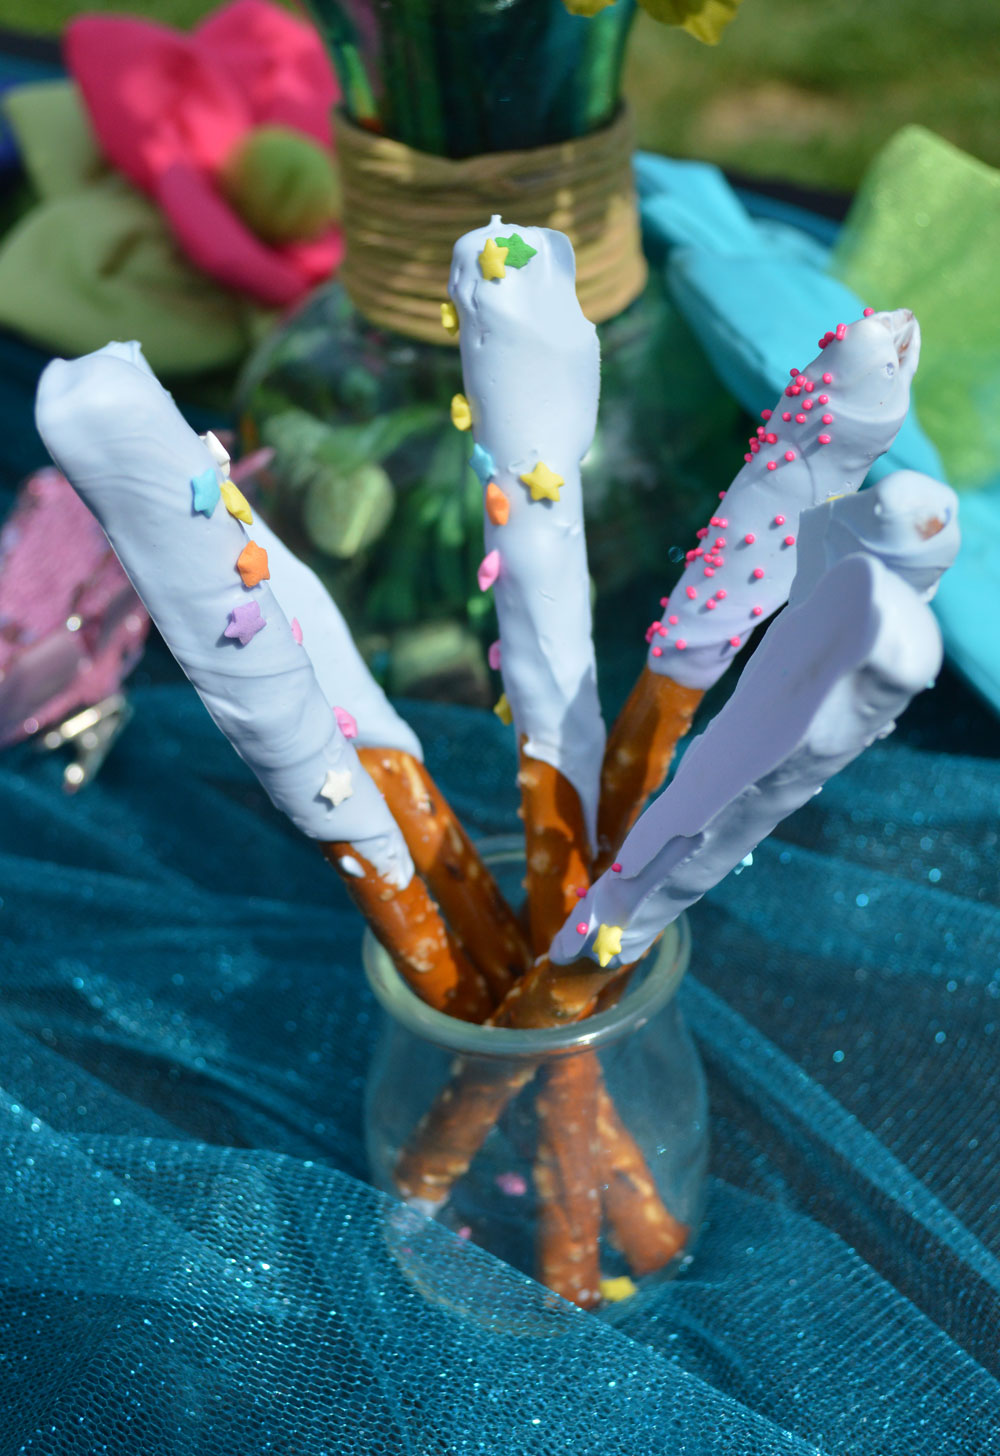 Chocolate dipped pretzels party favors